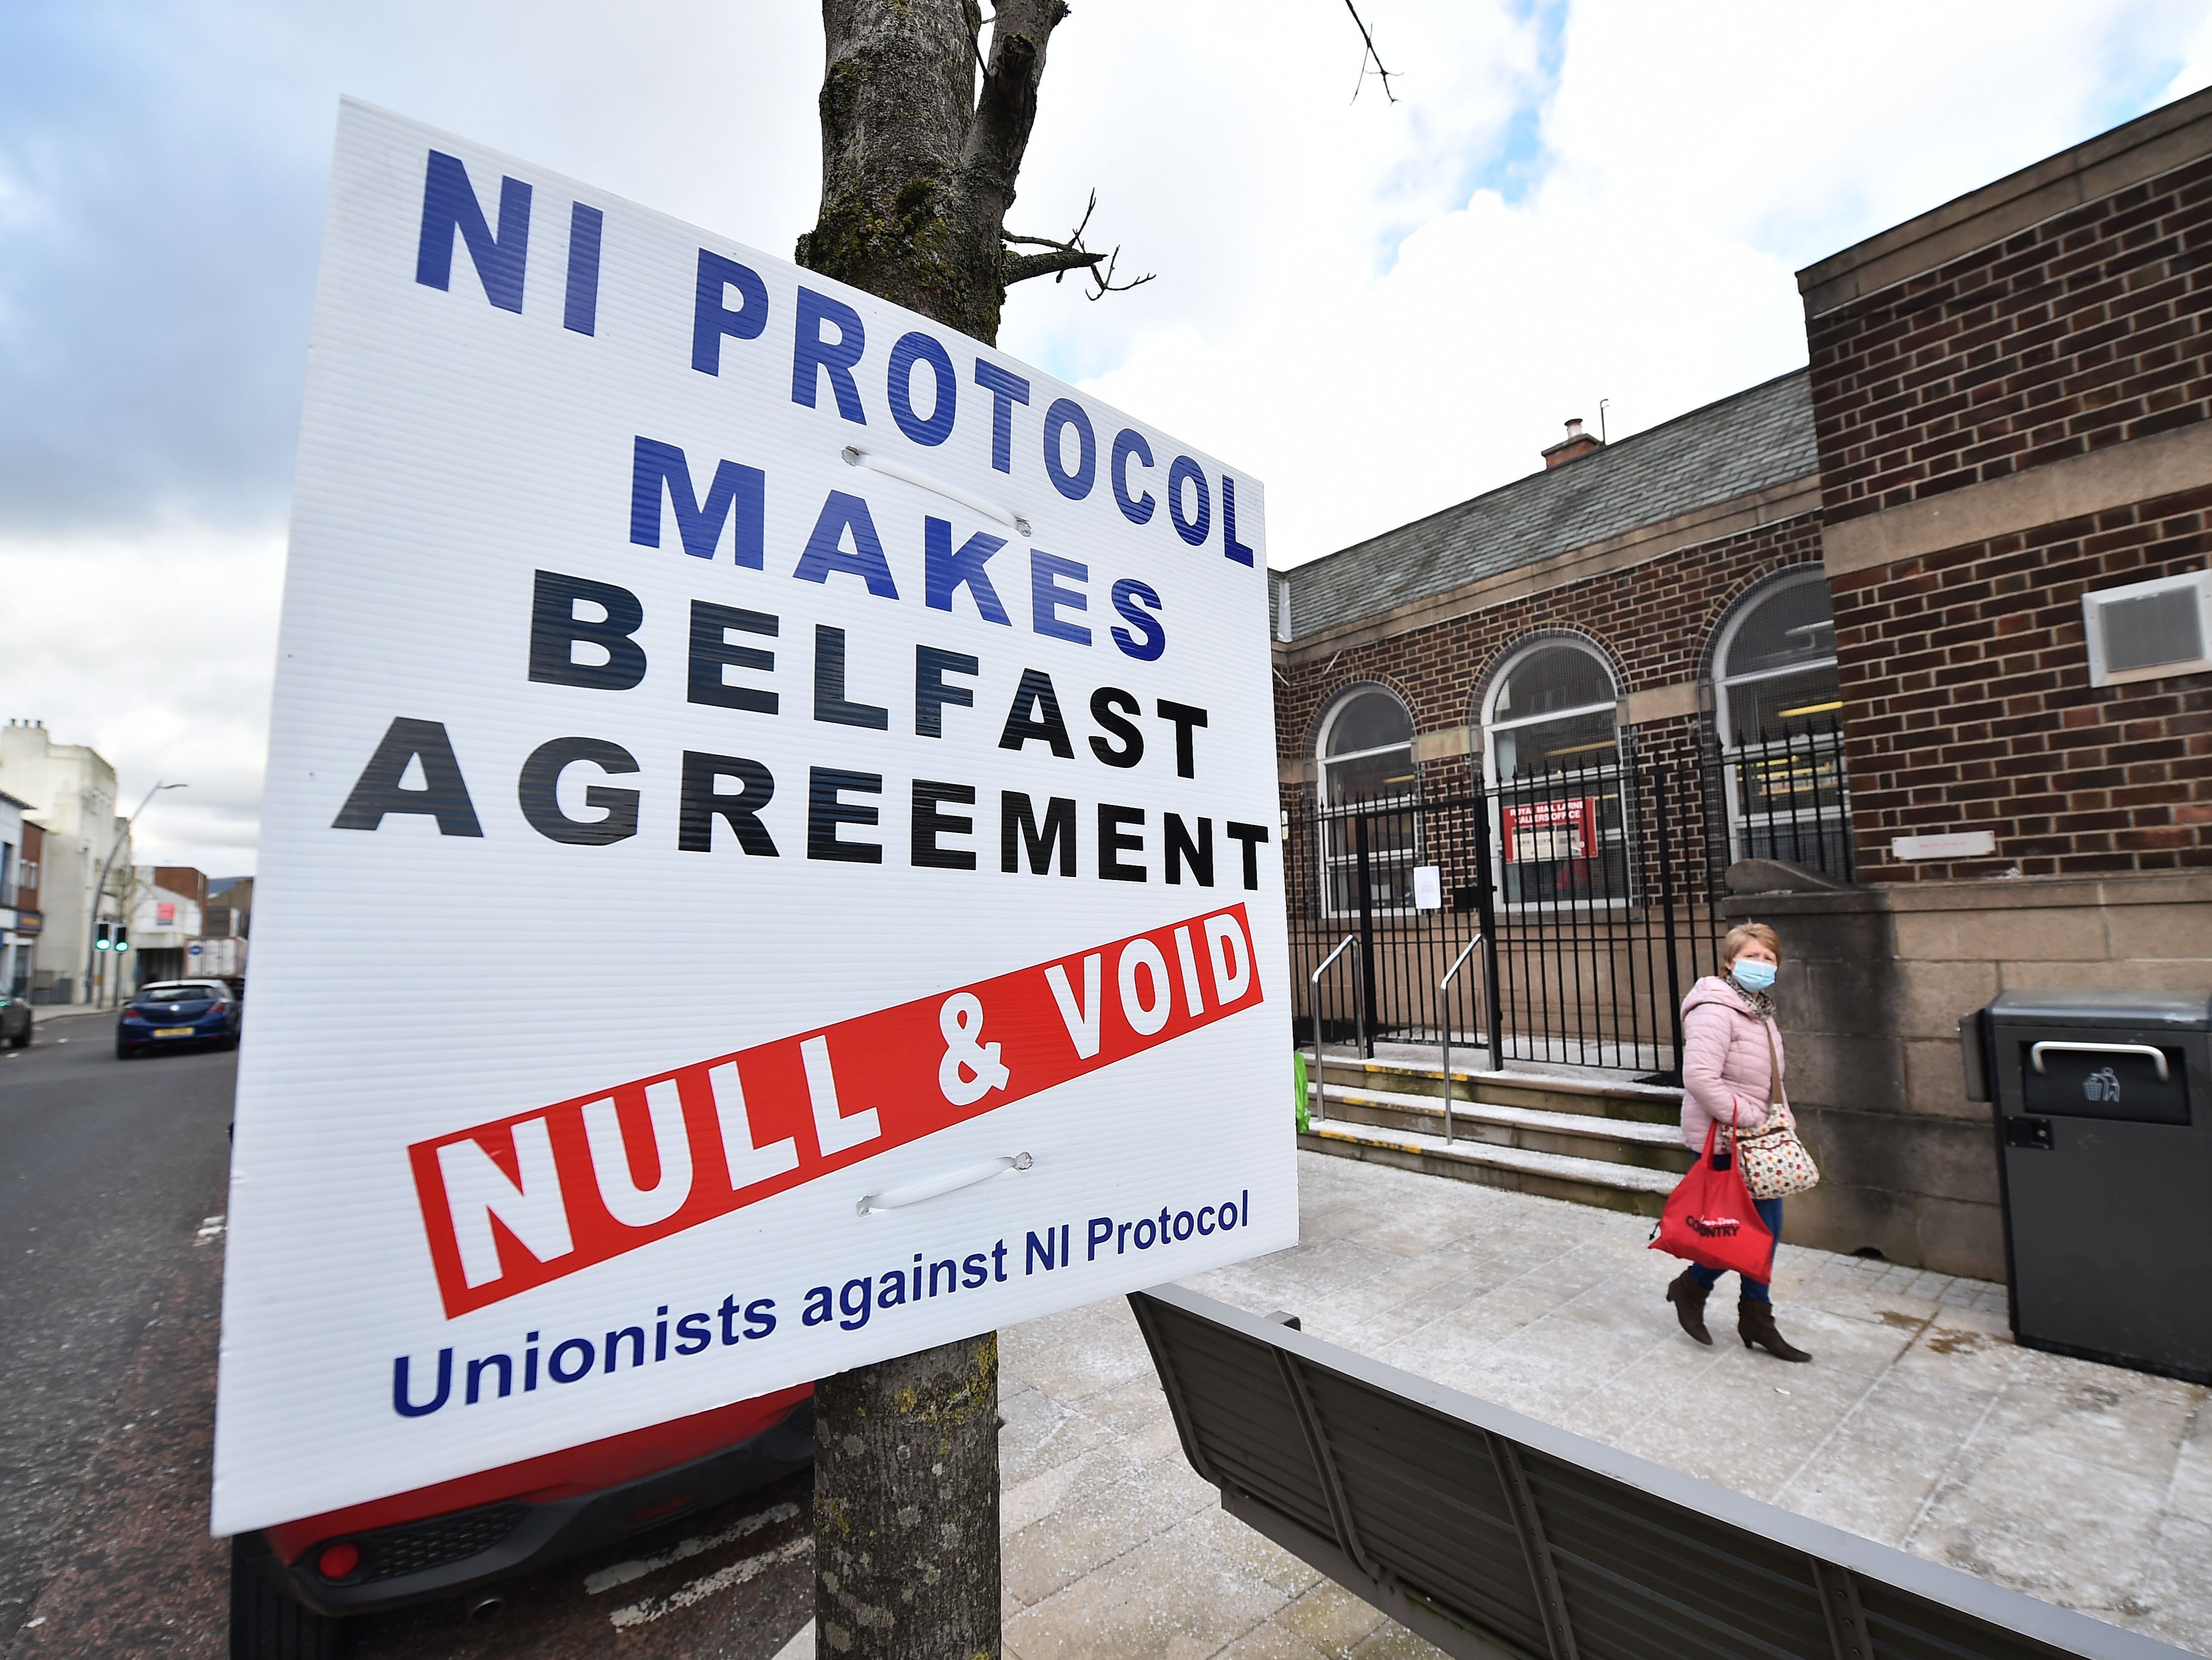 A Unionist sign protesting against the NI Protocol is seen in Larne town centre